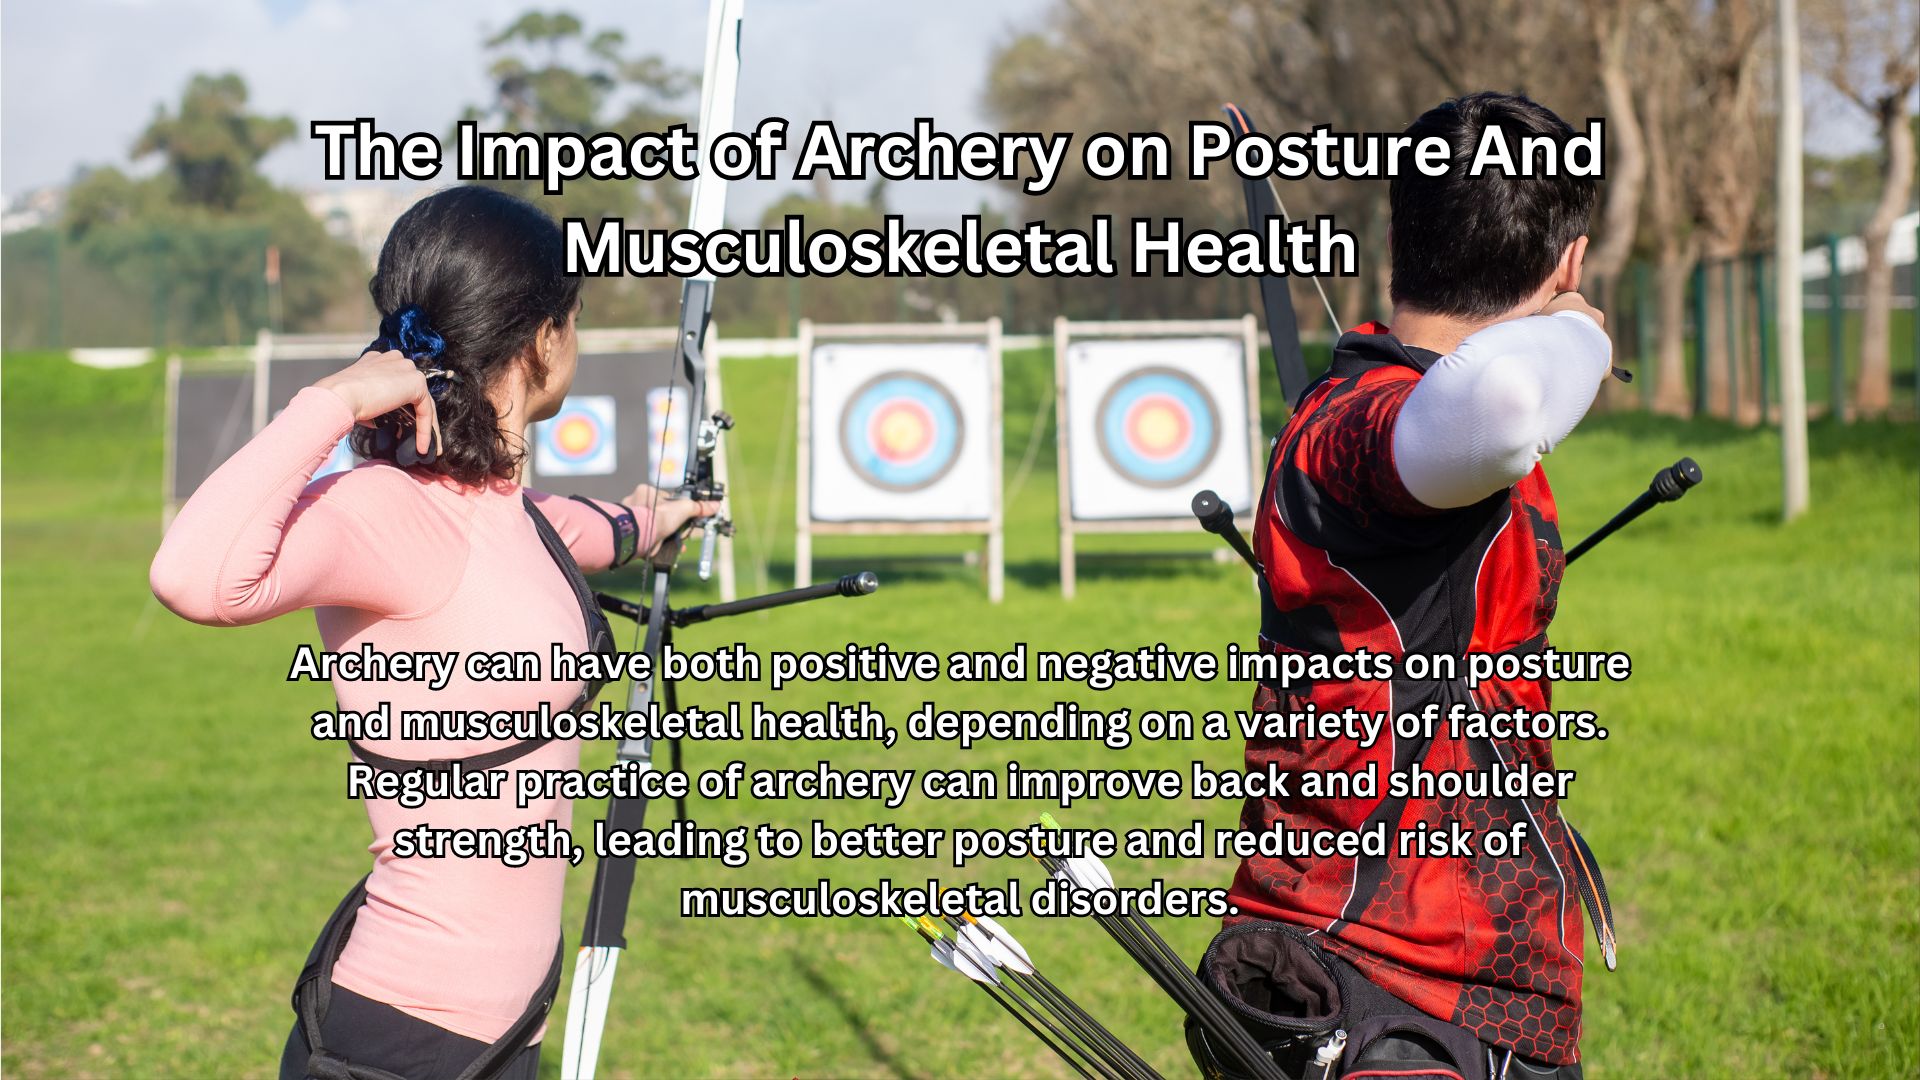 Archery on Posture And Musculoskeletal Health